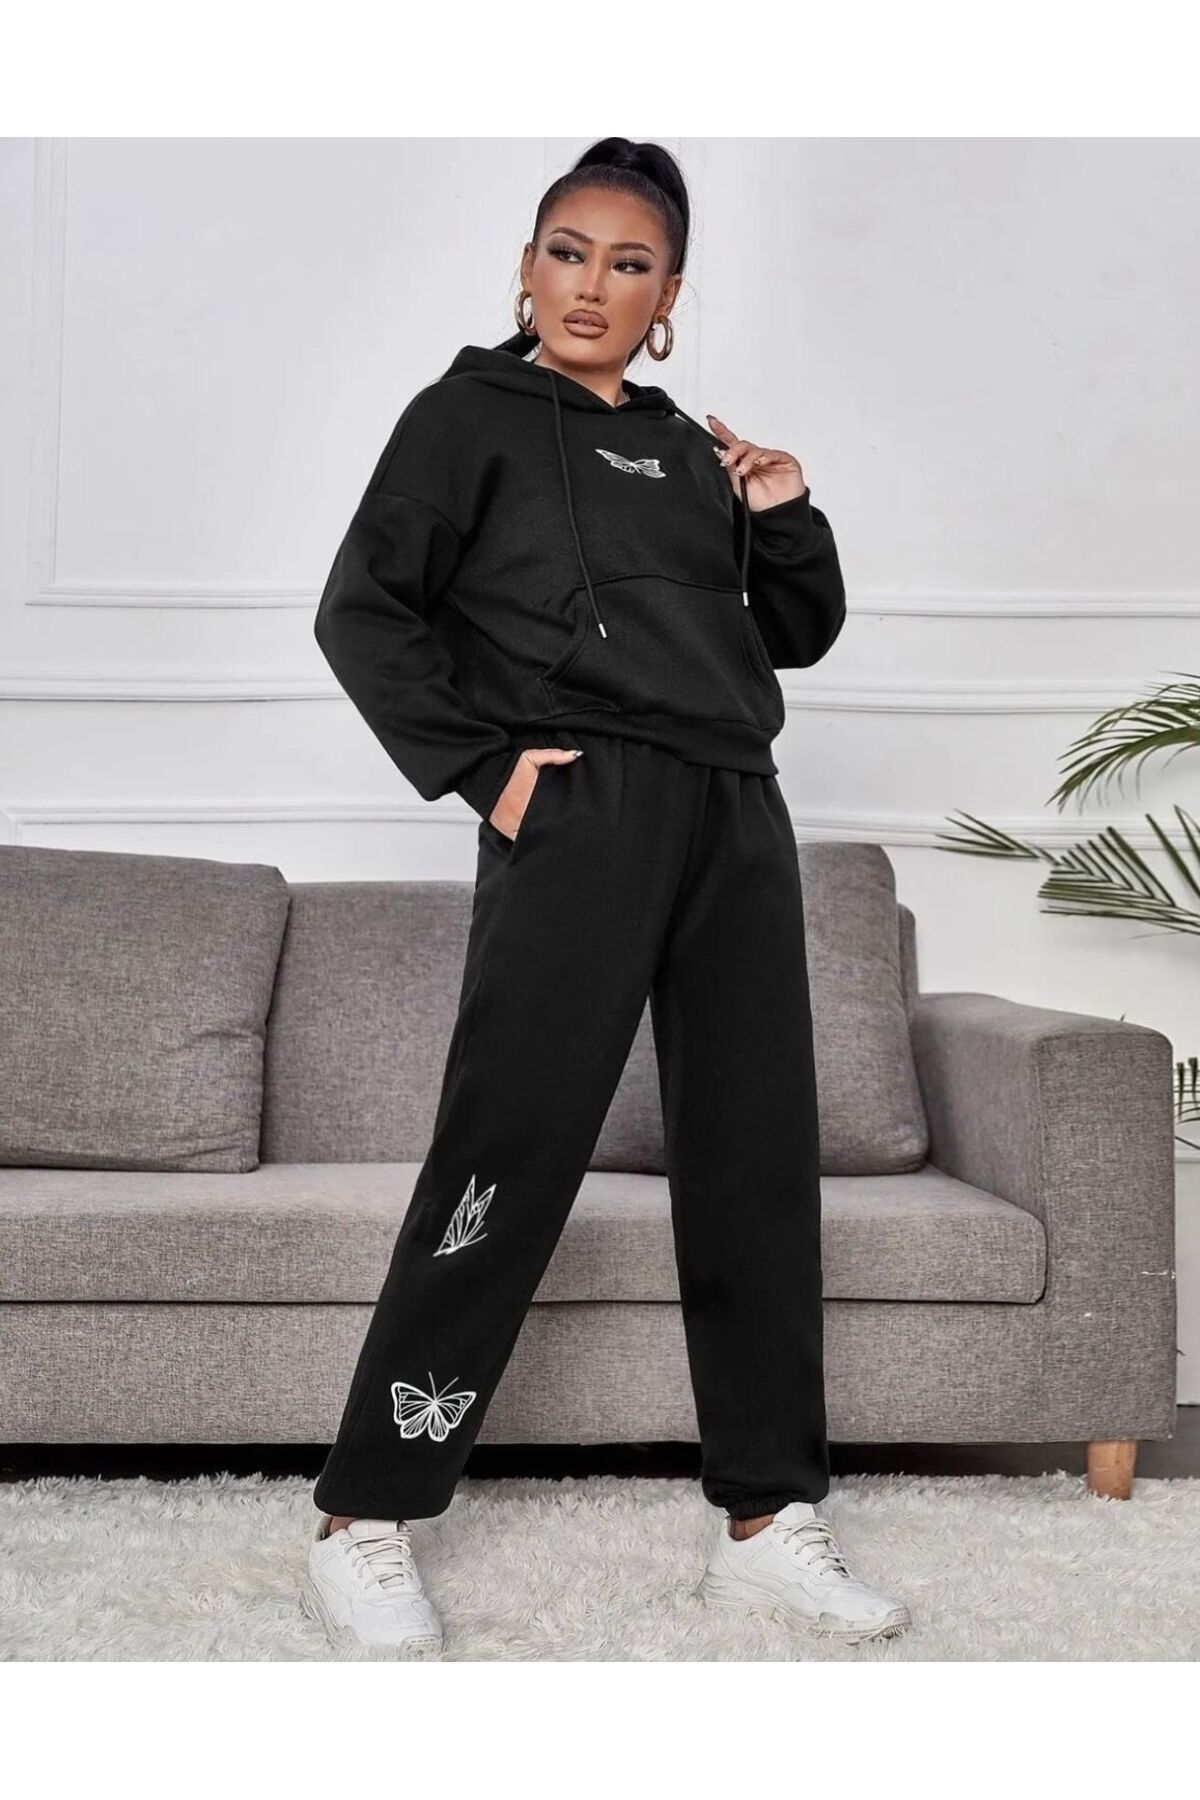 Womens Tracksuits, Black Joggers and Set